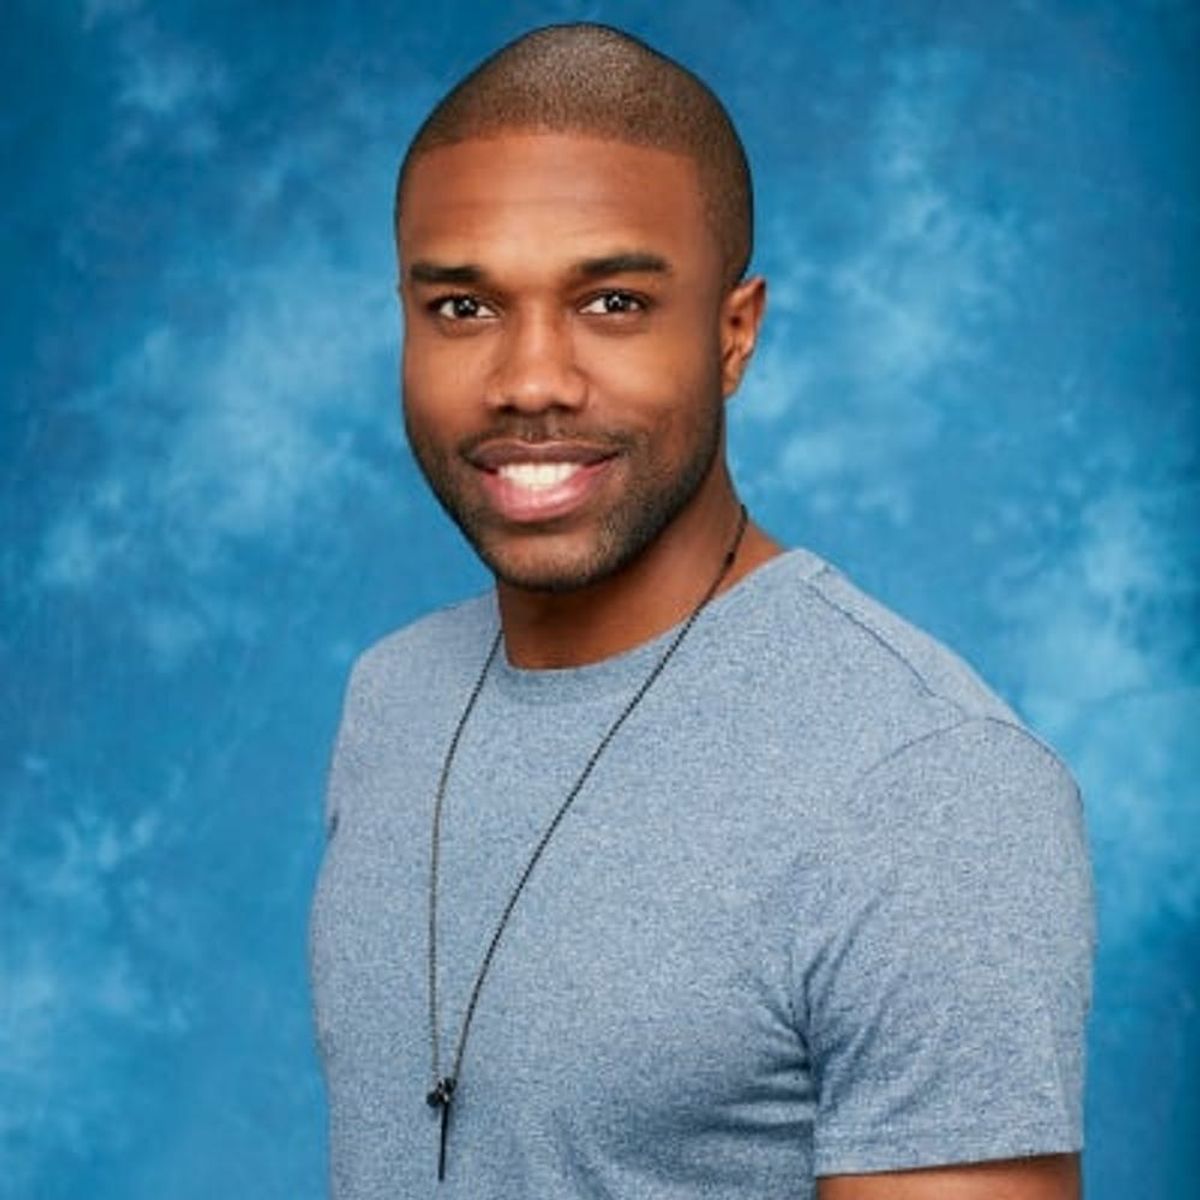 Bachelor in Paradise’s DeMario Jackson Does His First Interview Since the Allegations